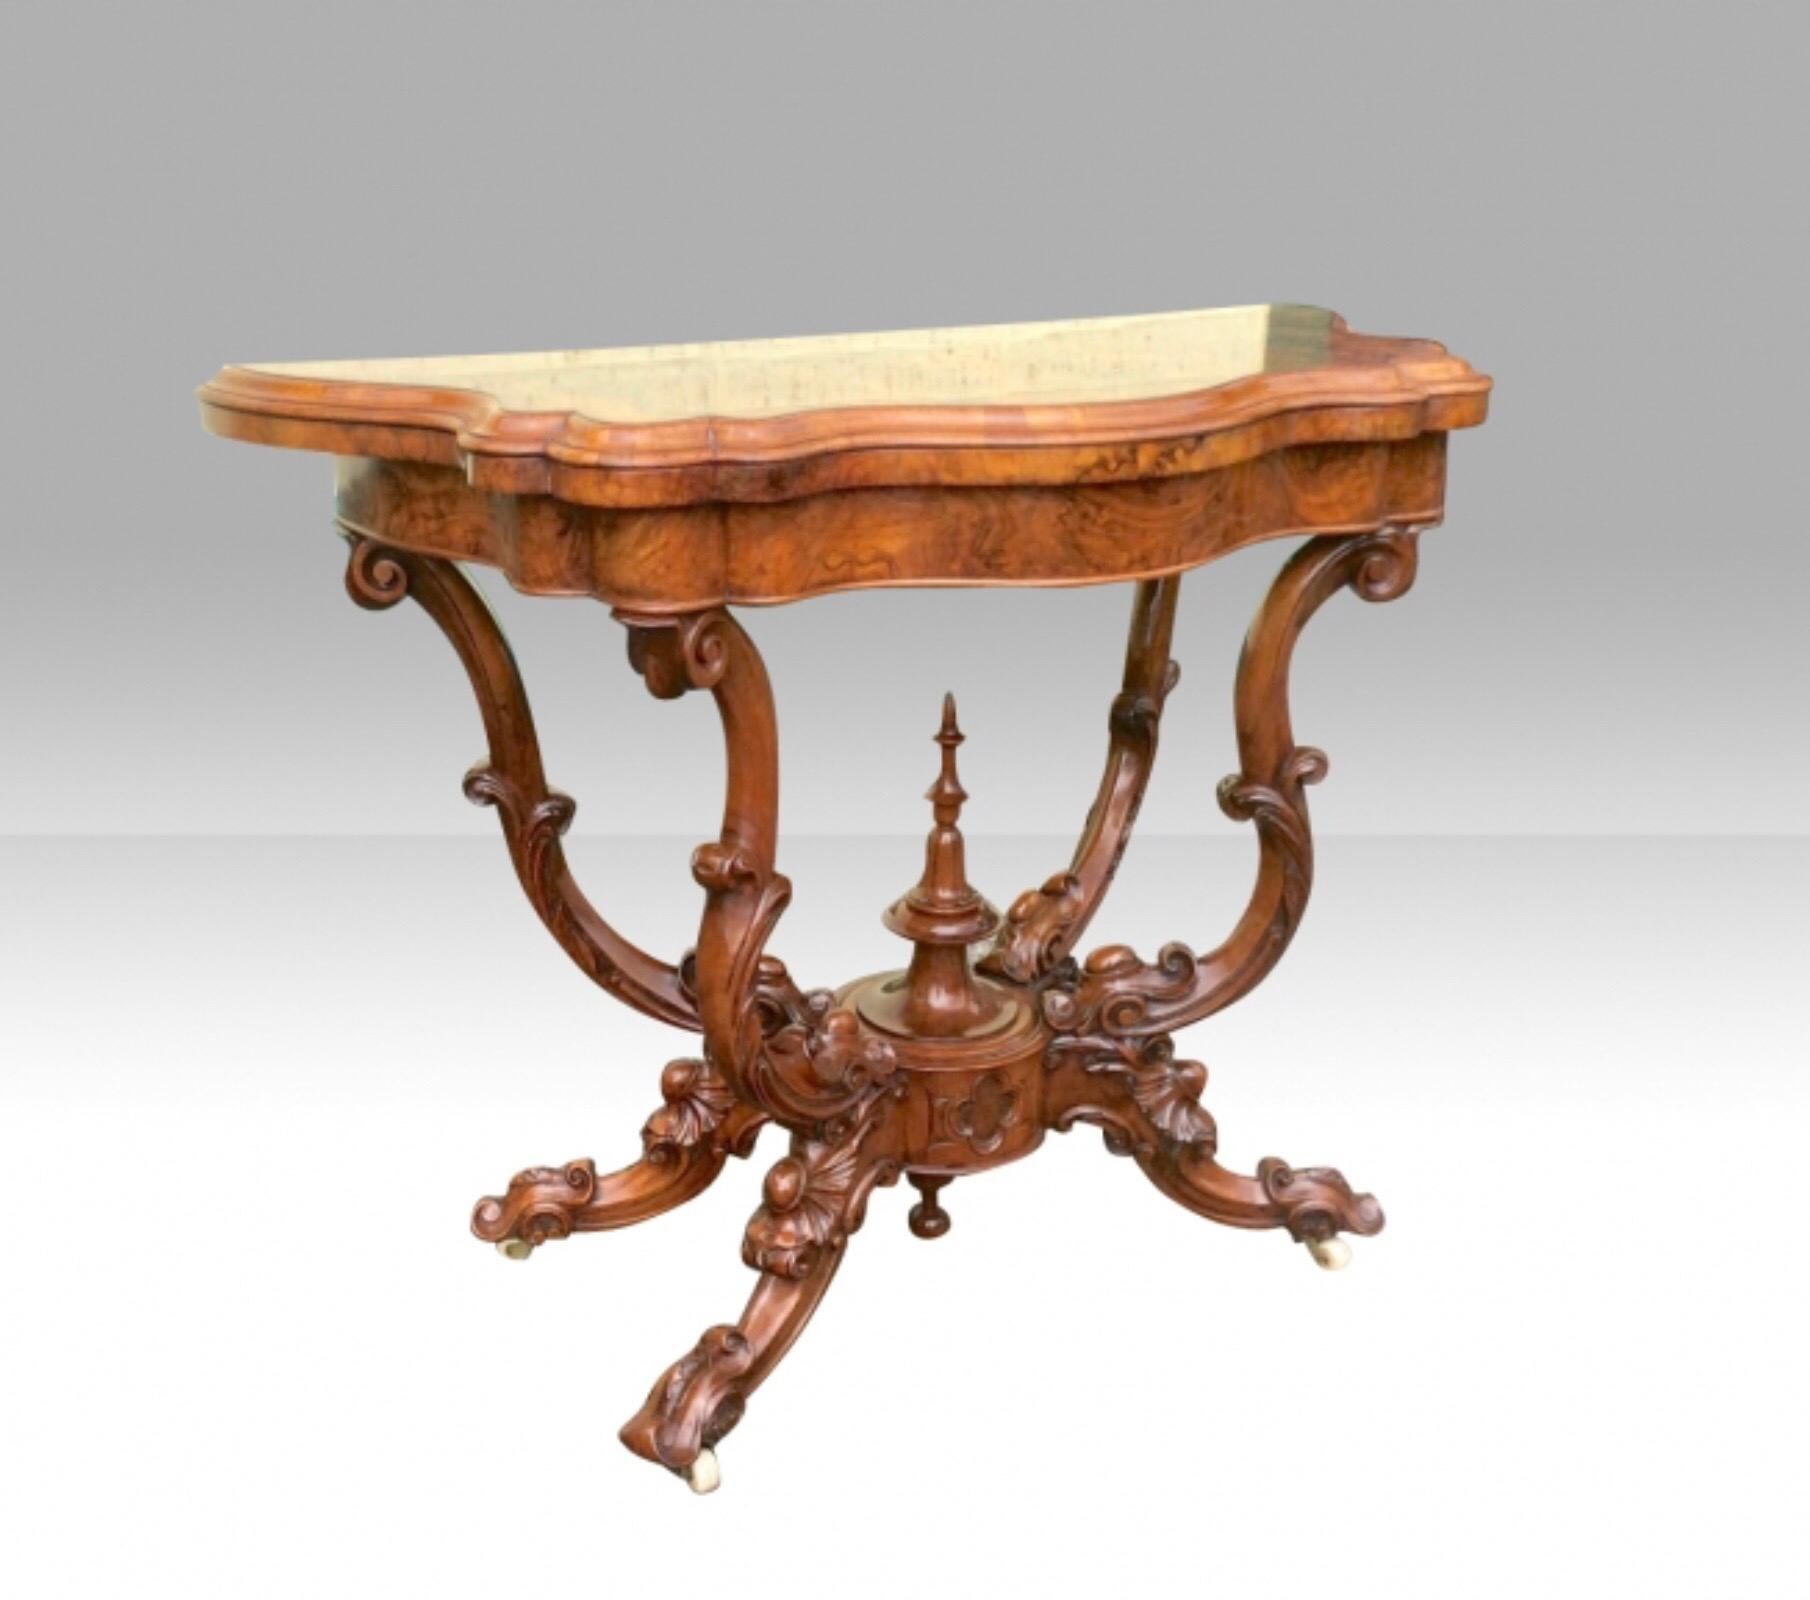 Magnificent Burr Walnut serpentine shaped antique games card table, which turns and folds over to reveal green baize playing surface sitting on a magnificent carved Cradle base .
Stunning Condition.
Circa 1870
Dimensions
Height = 74 cm (29.5